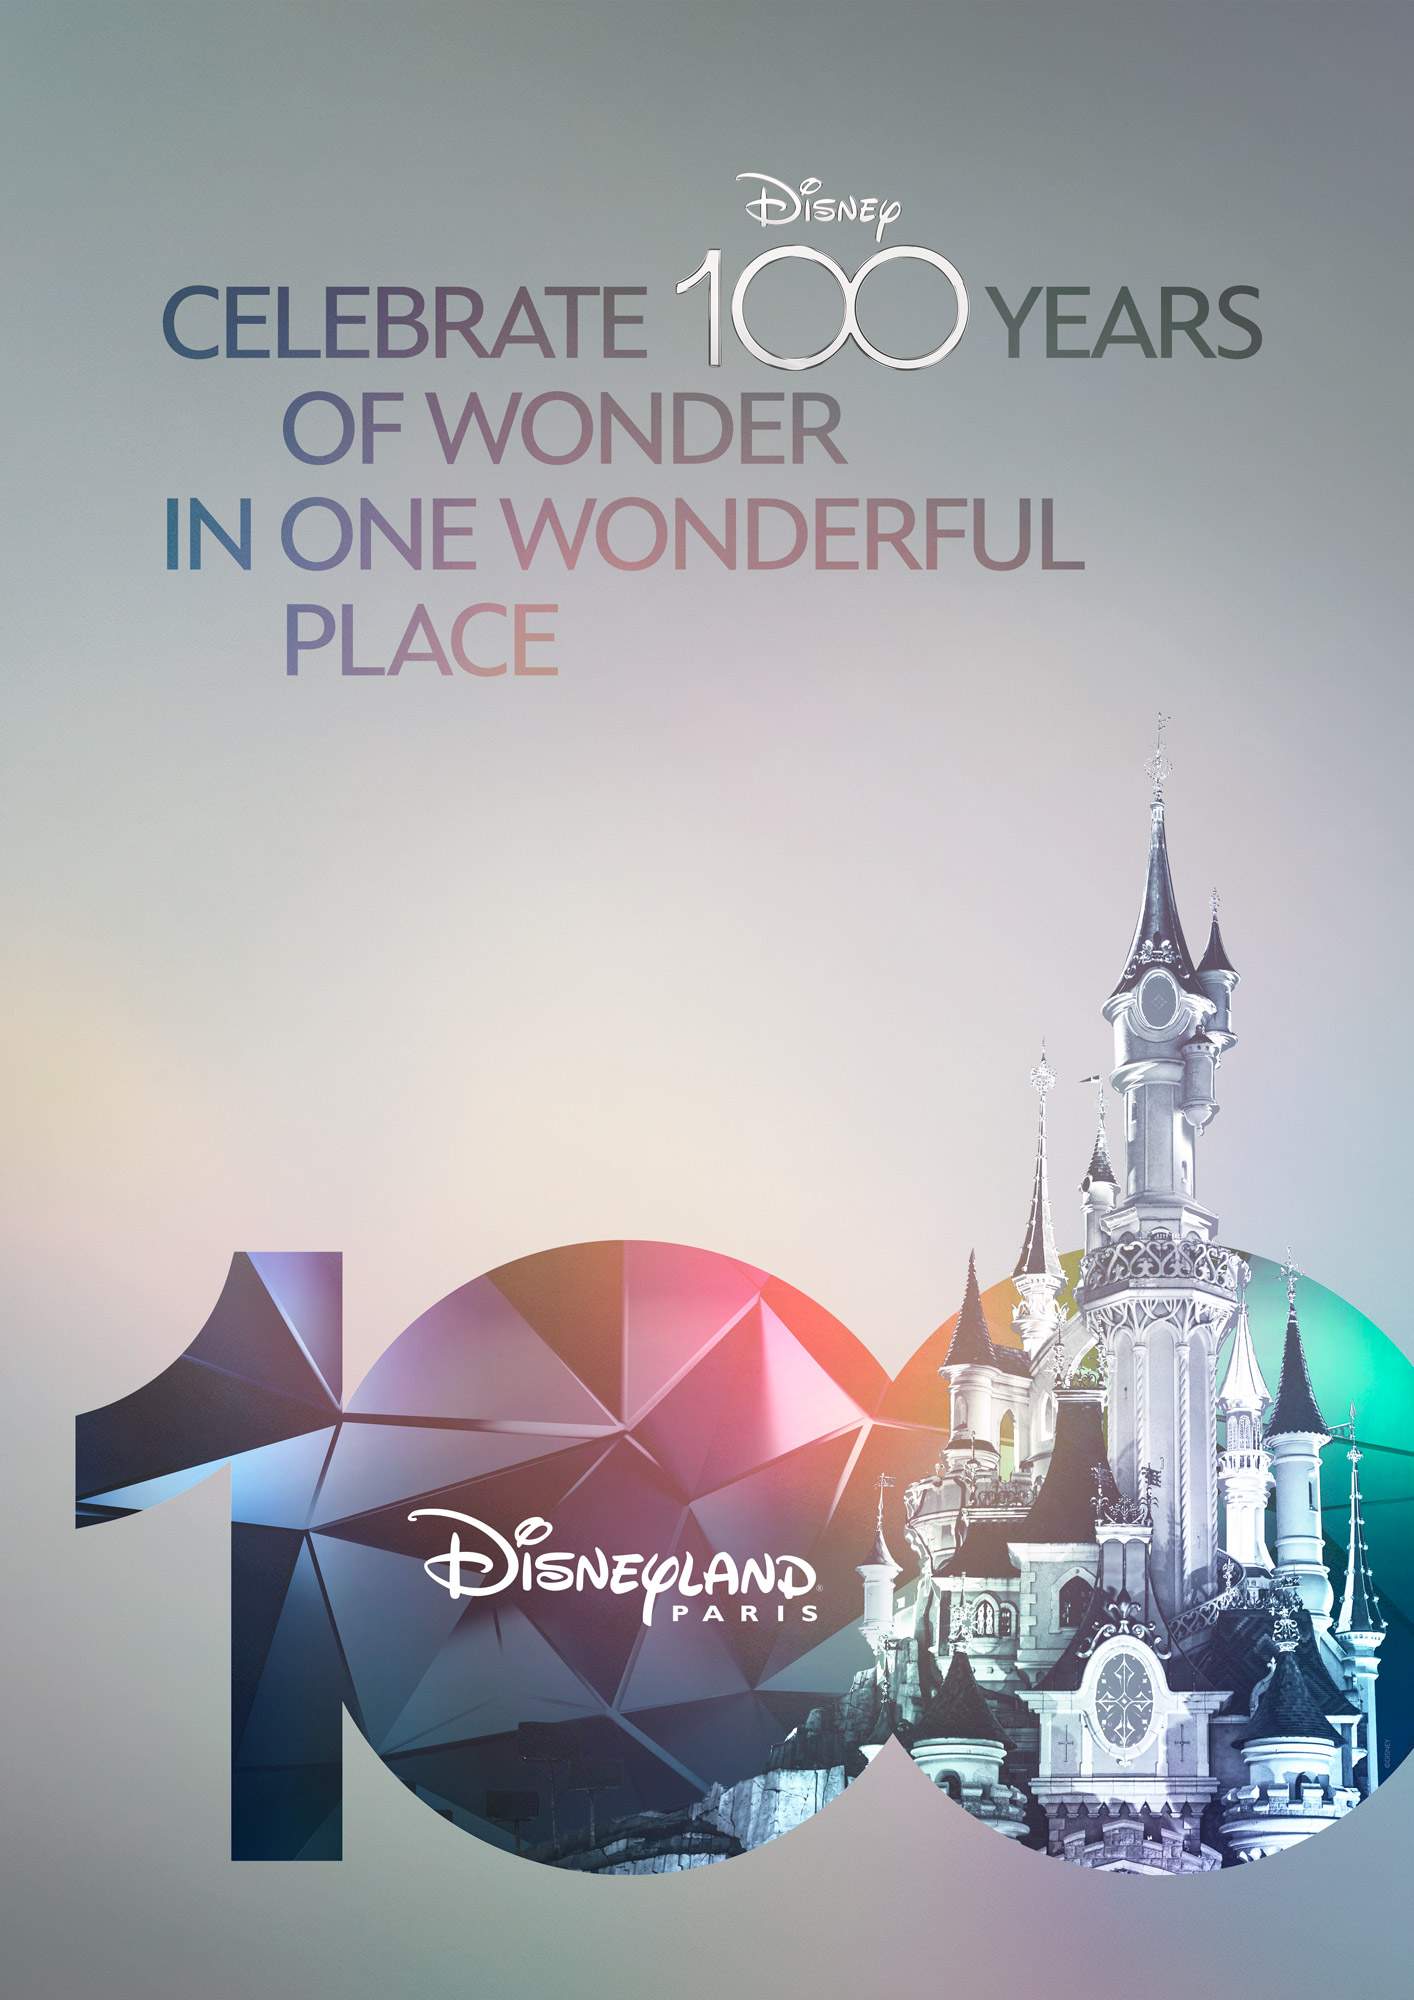 The Walt Disney Company is getting ready to celebrate a 100 Years of